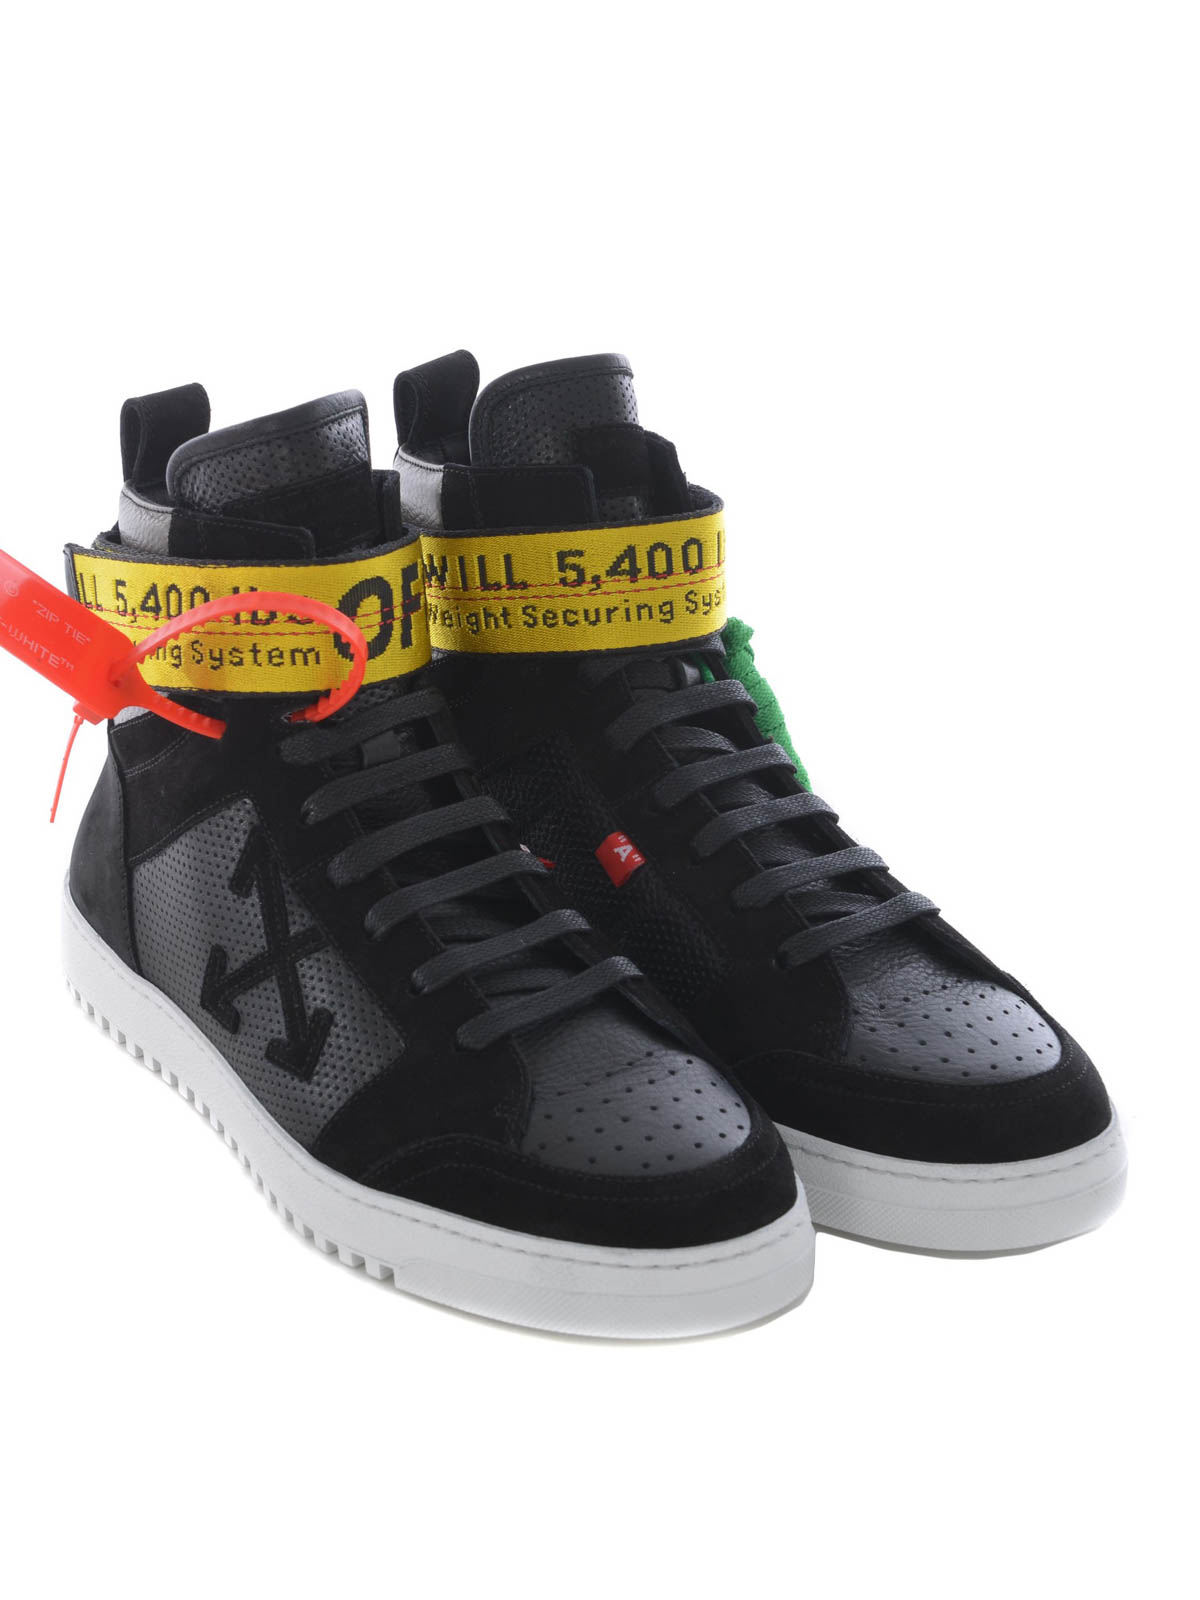 off white high top sneakers black